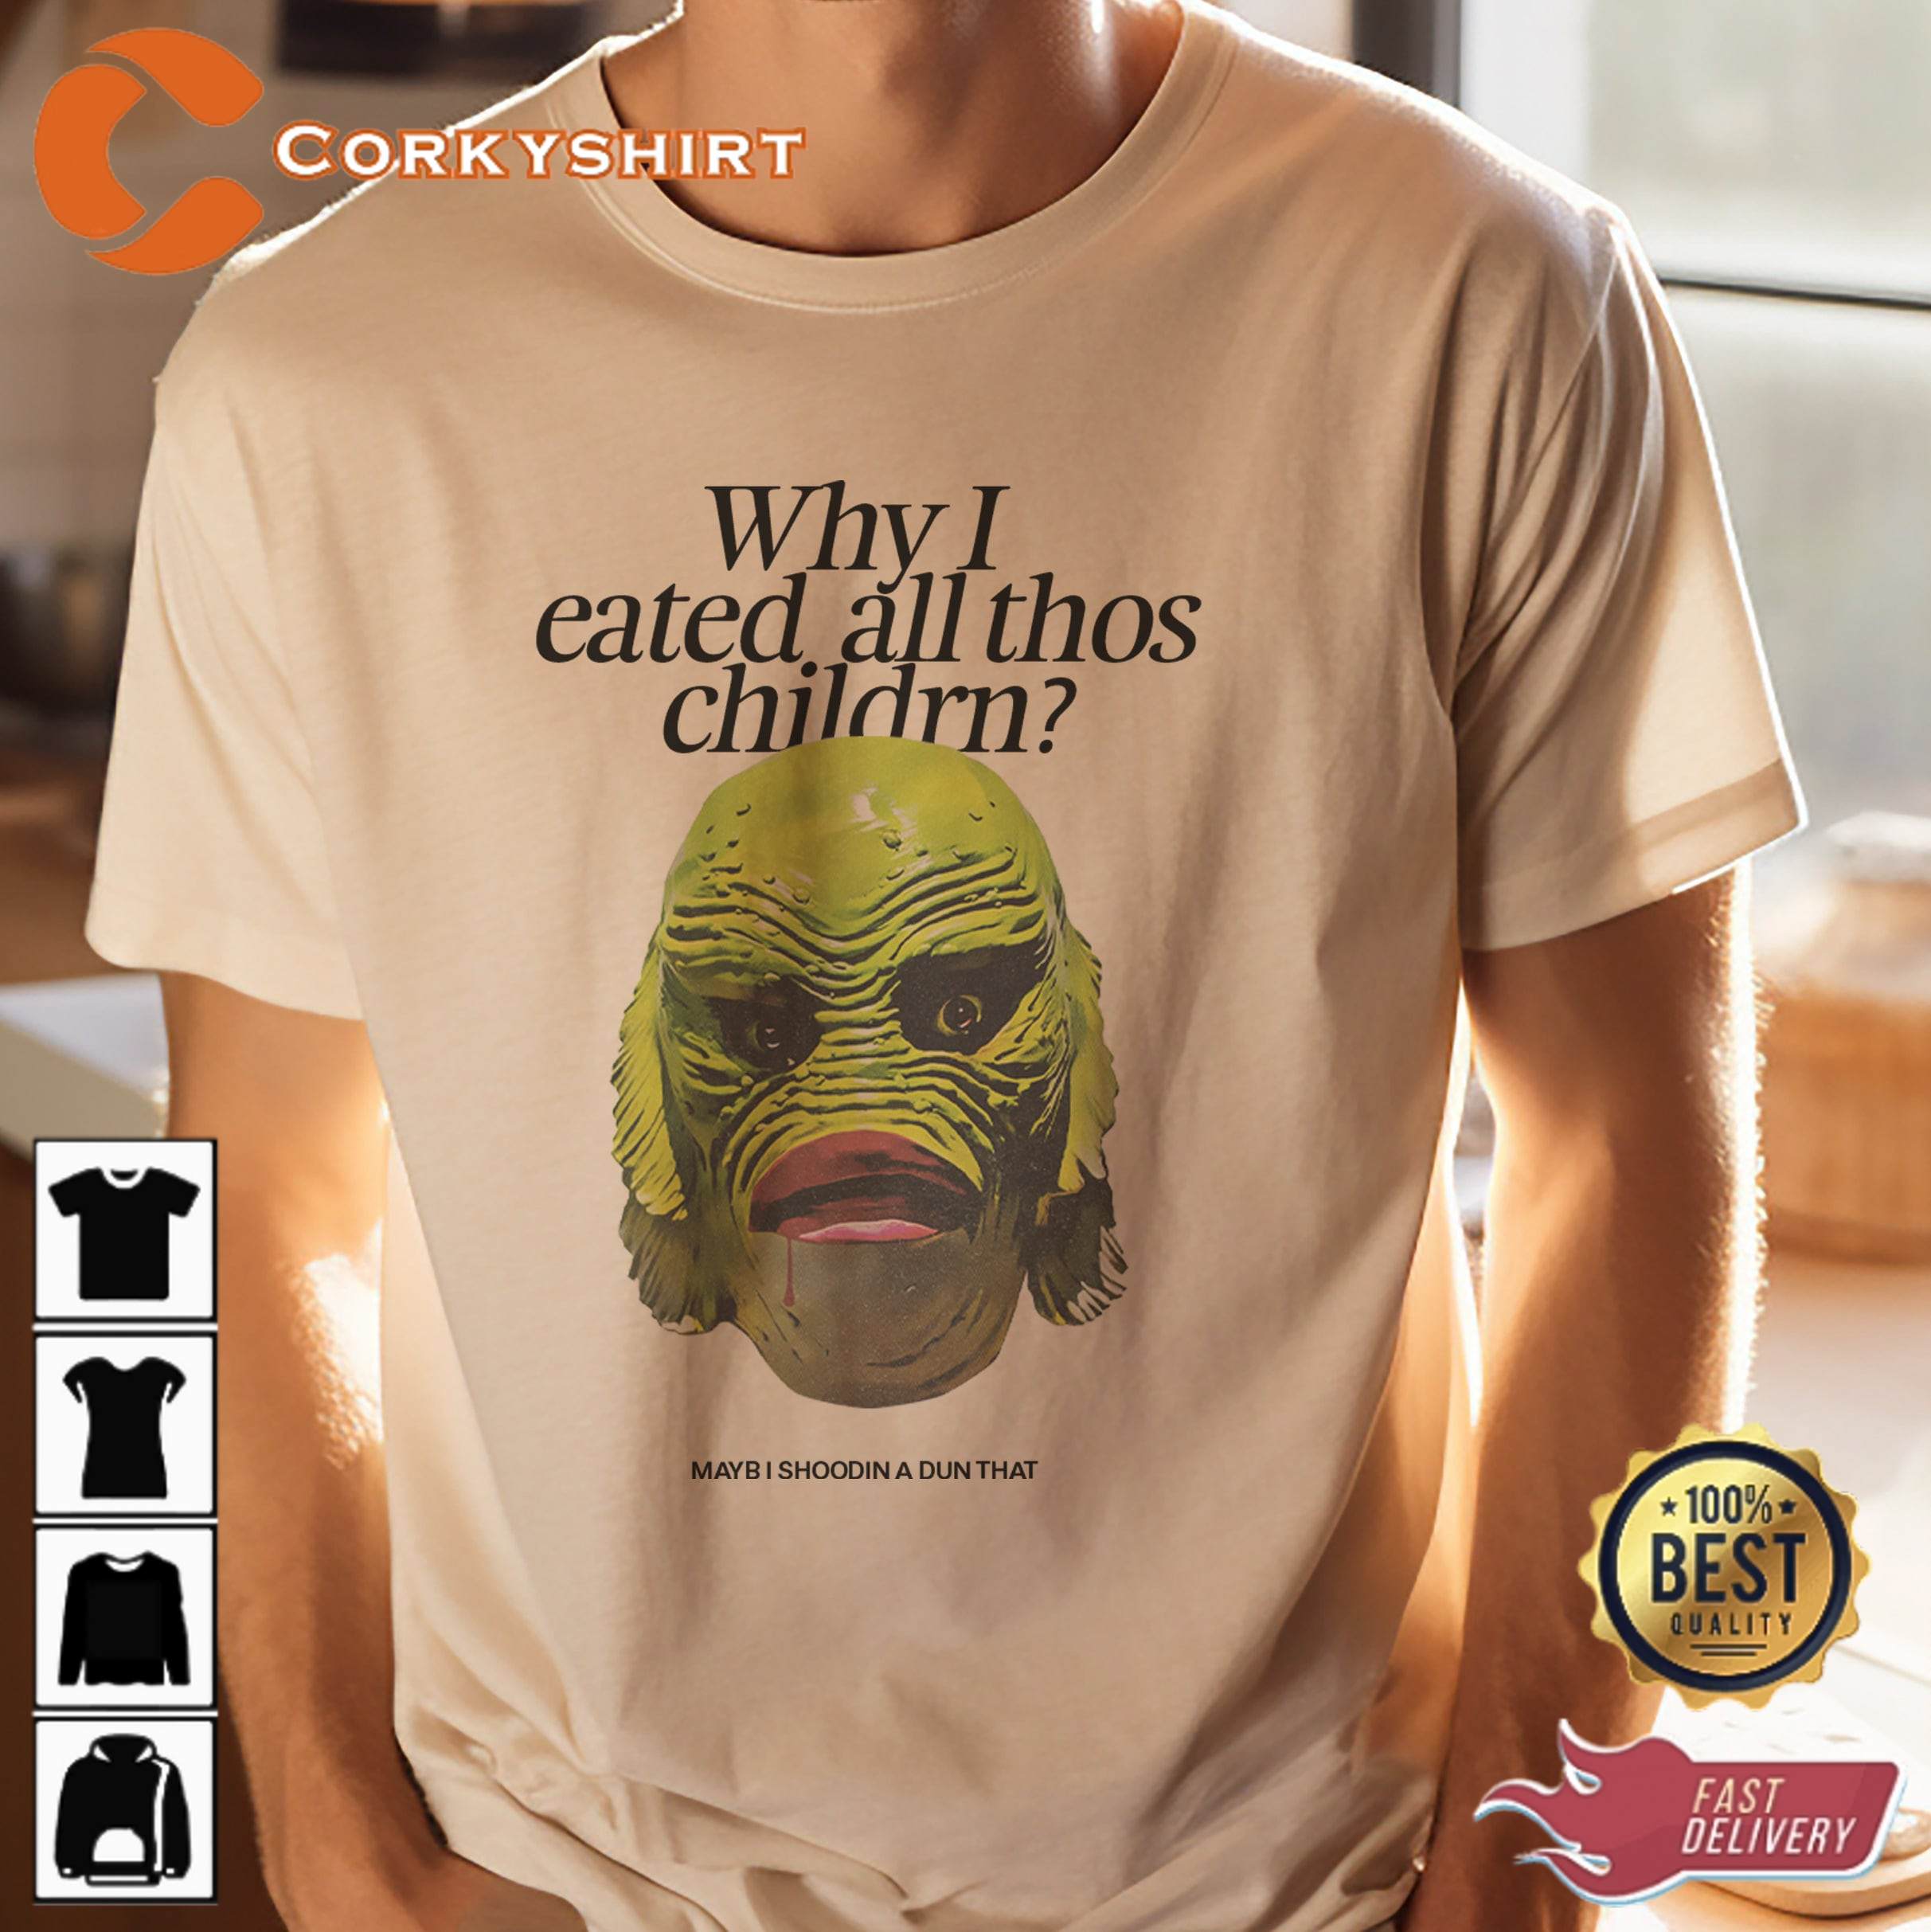 Weird Creature From The Black Lagoon T-shirt Funny Vintage Shirt